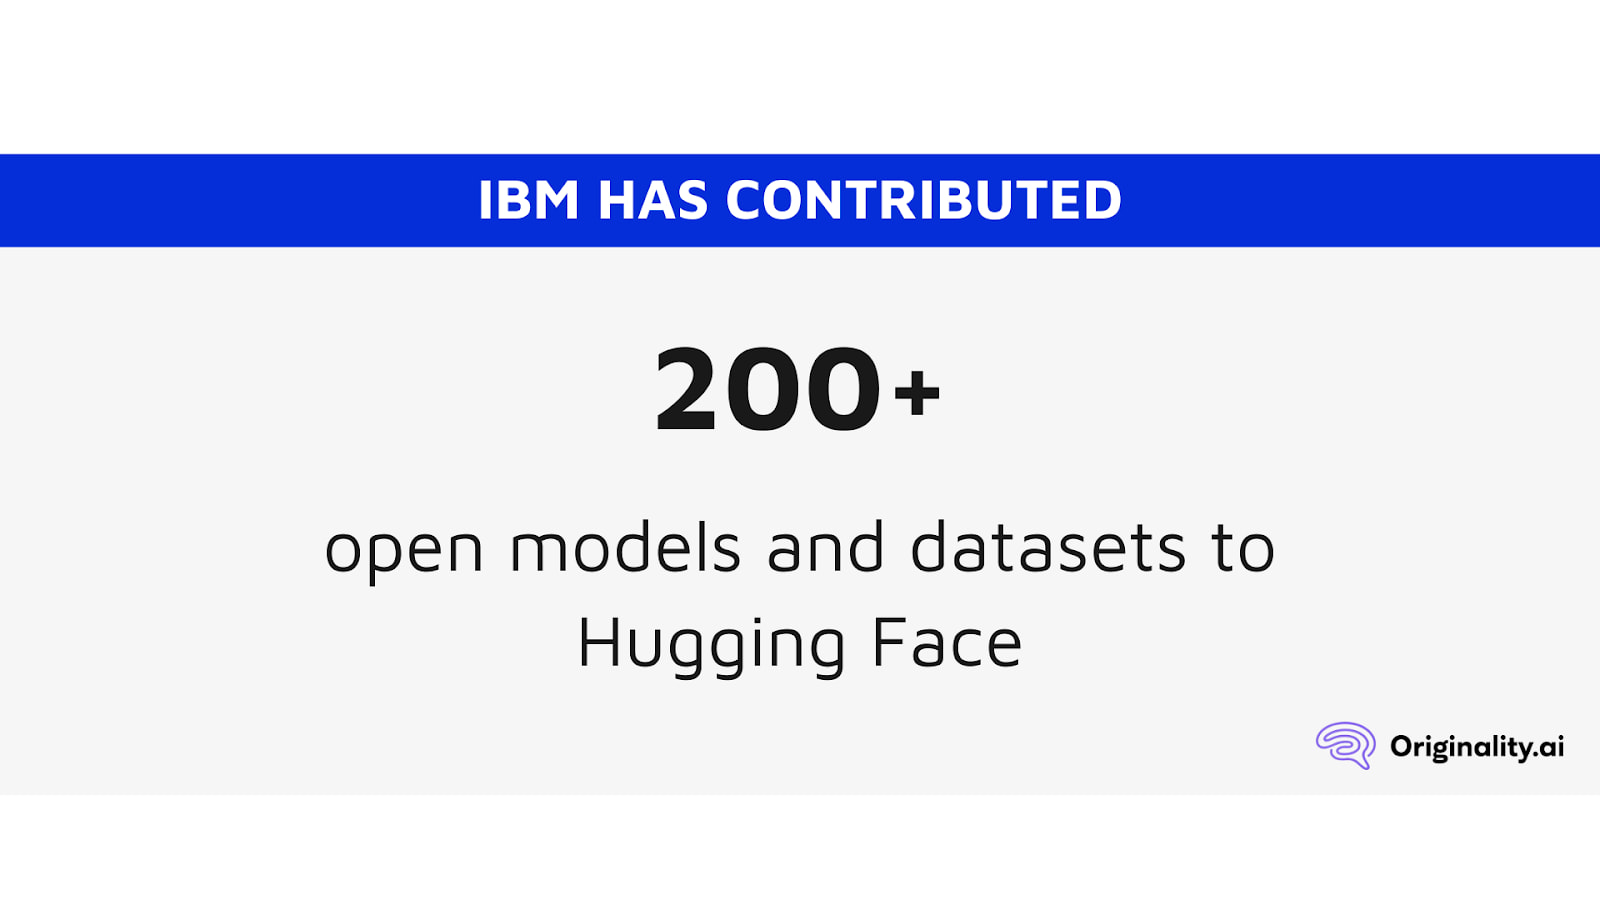 IBM has contributed over 200 open models and datasets to Hugging Face